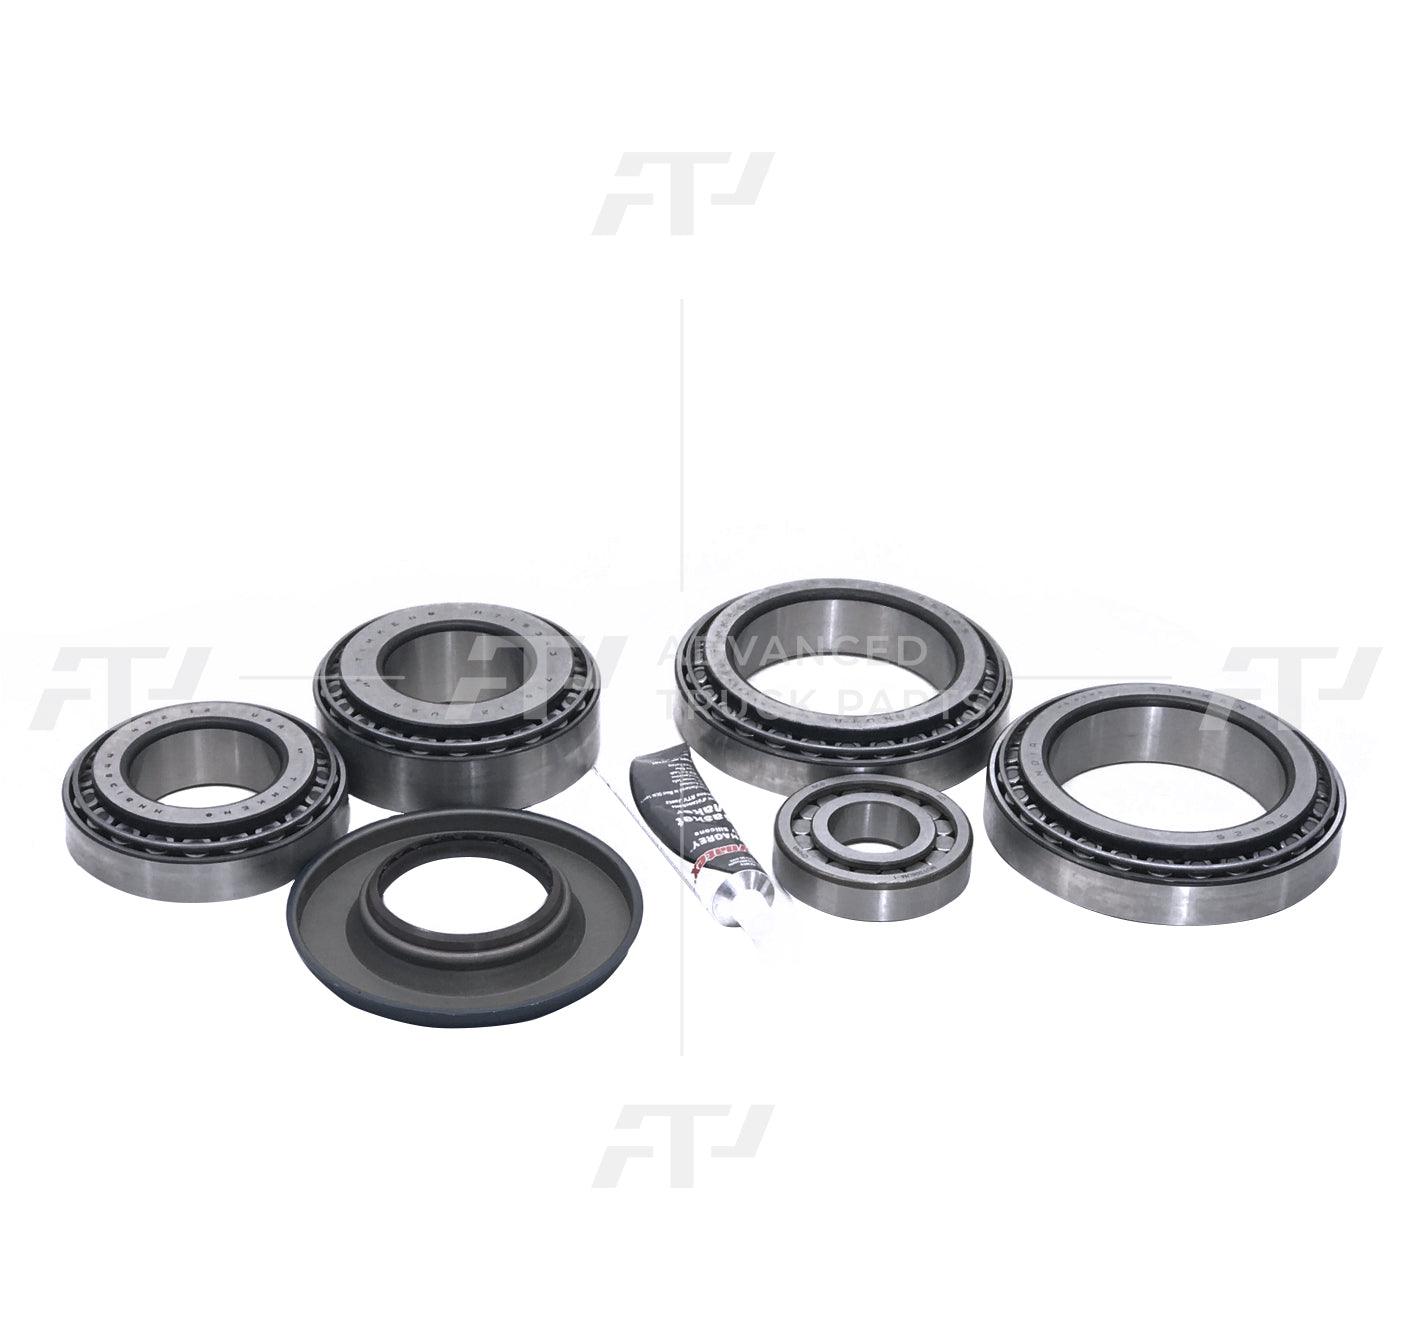 Drk201R Ra474 Dt Components® Rear Differential Bearing Rebuild Kit For Navistar - ADVANCED TRUCK PARTS